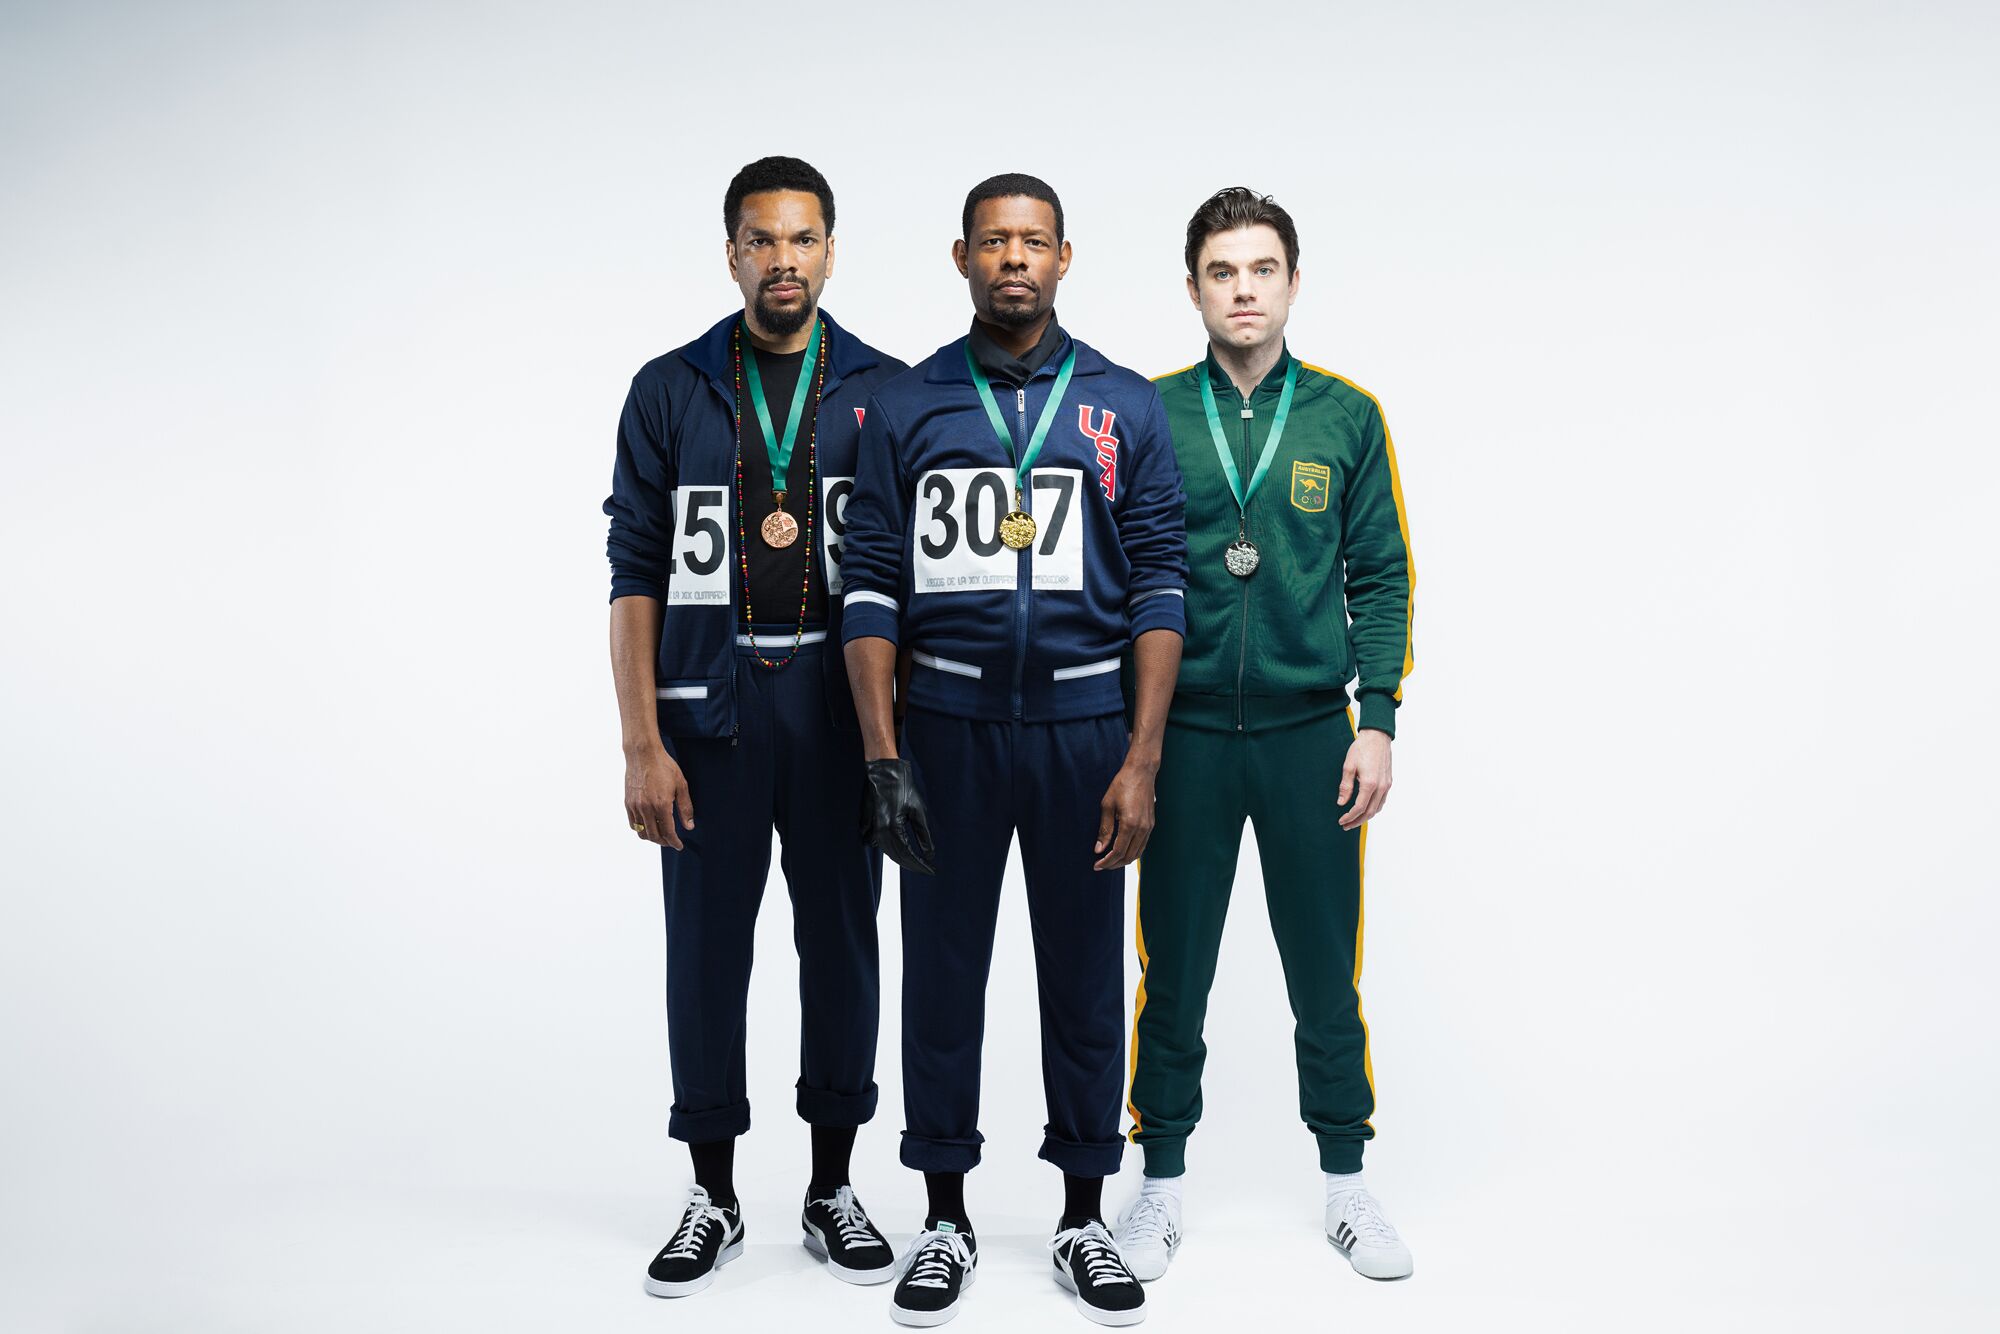 Three actors in track suits lined up left to right.